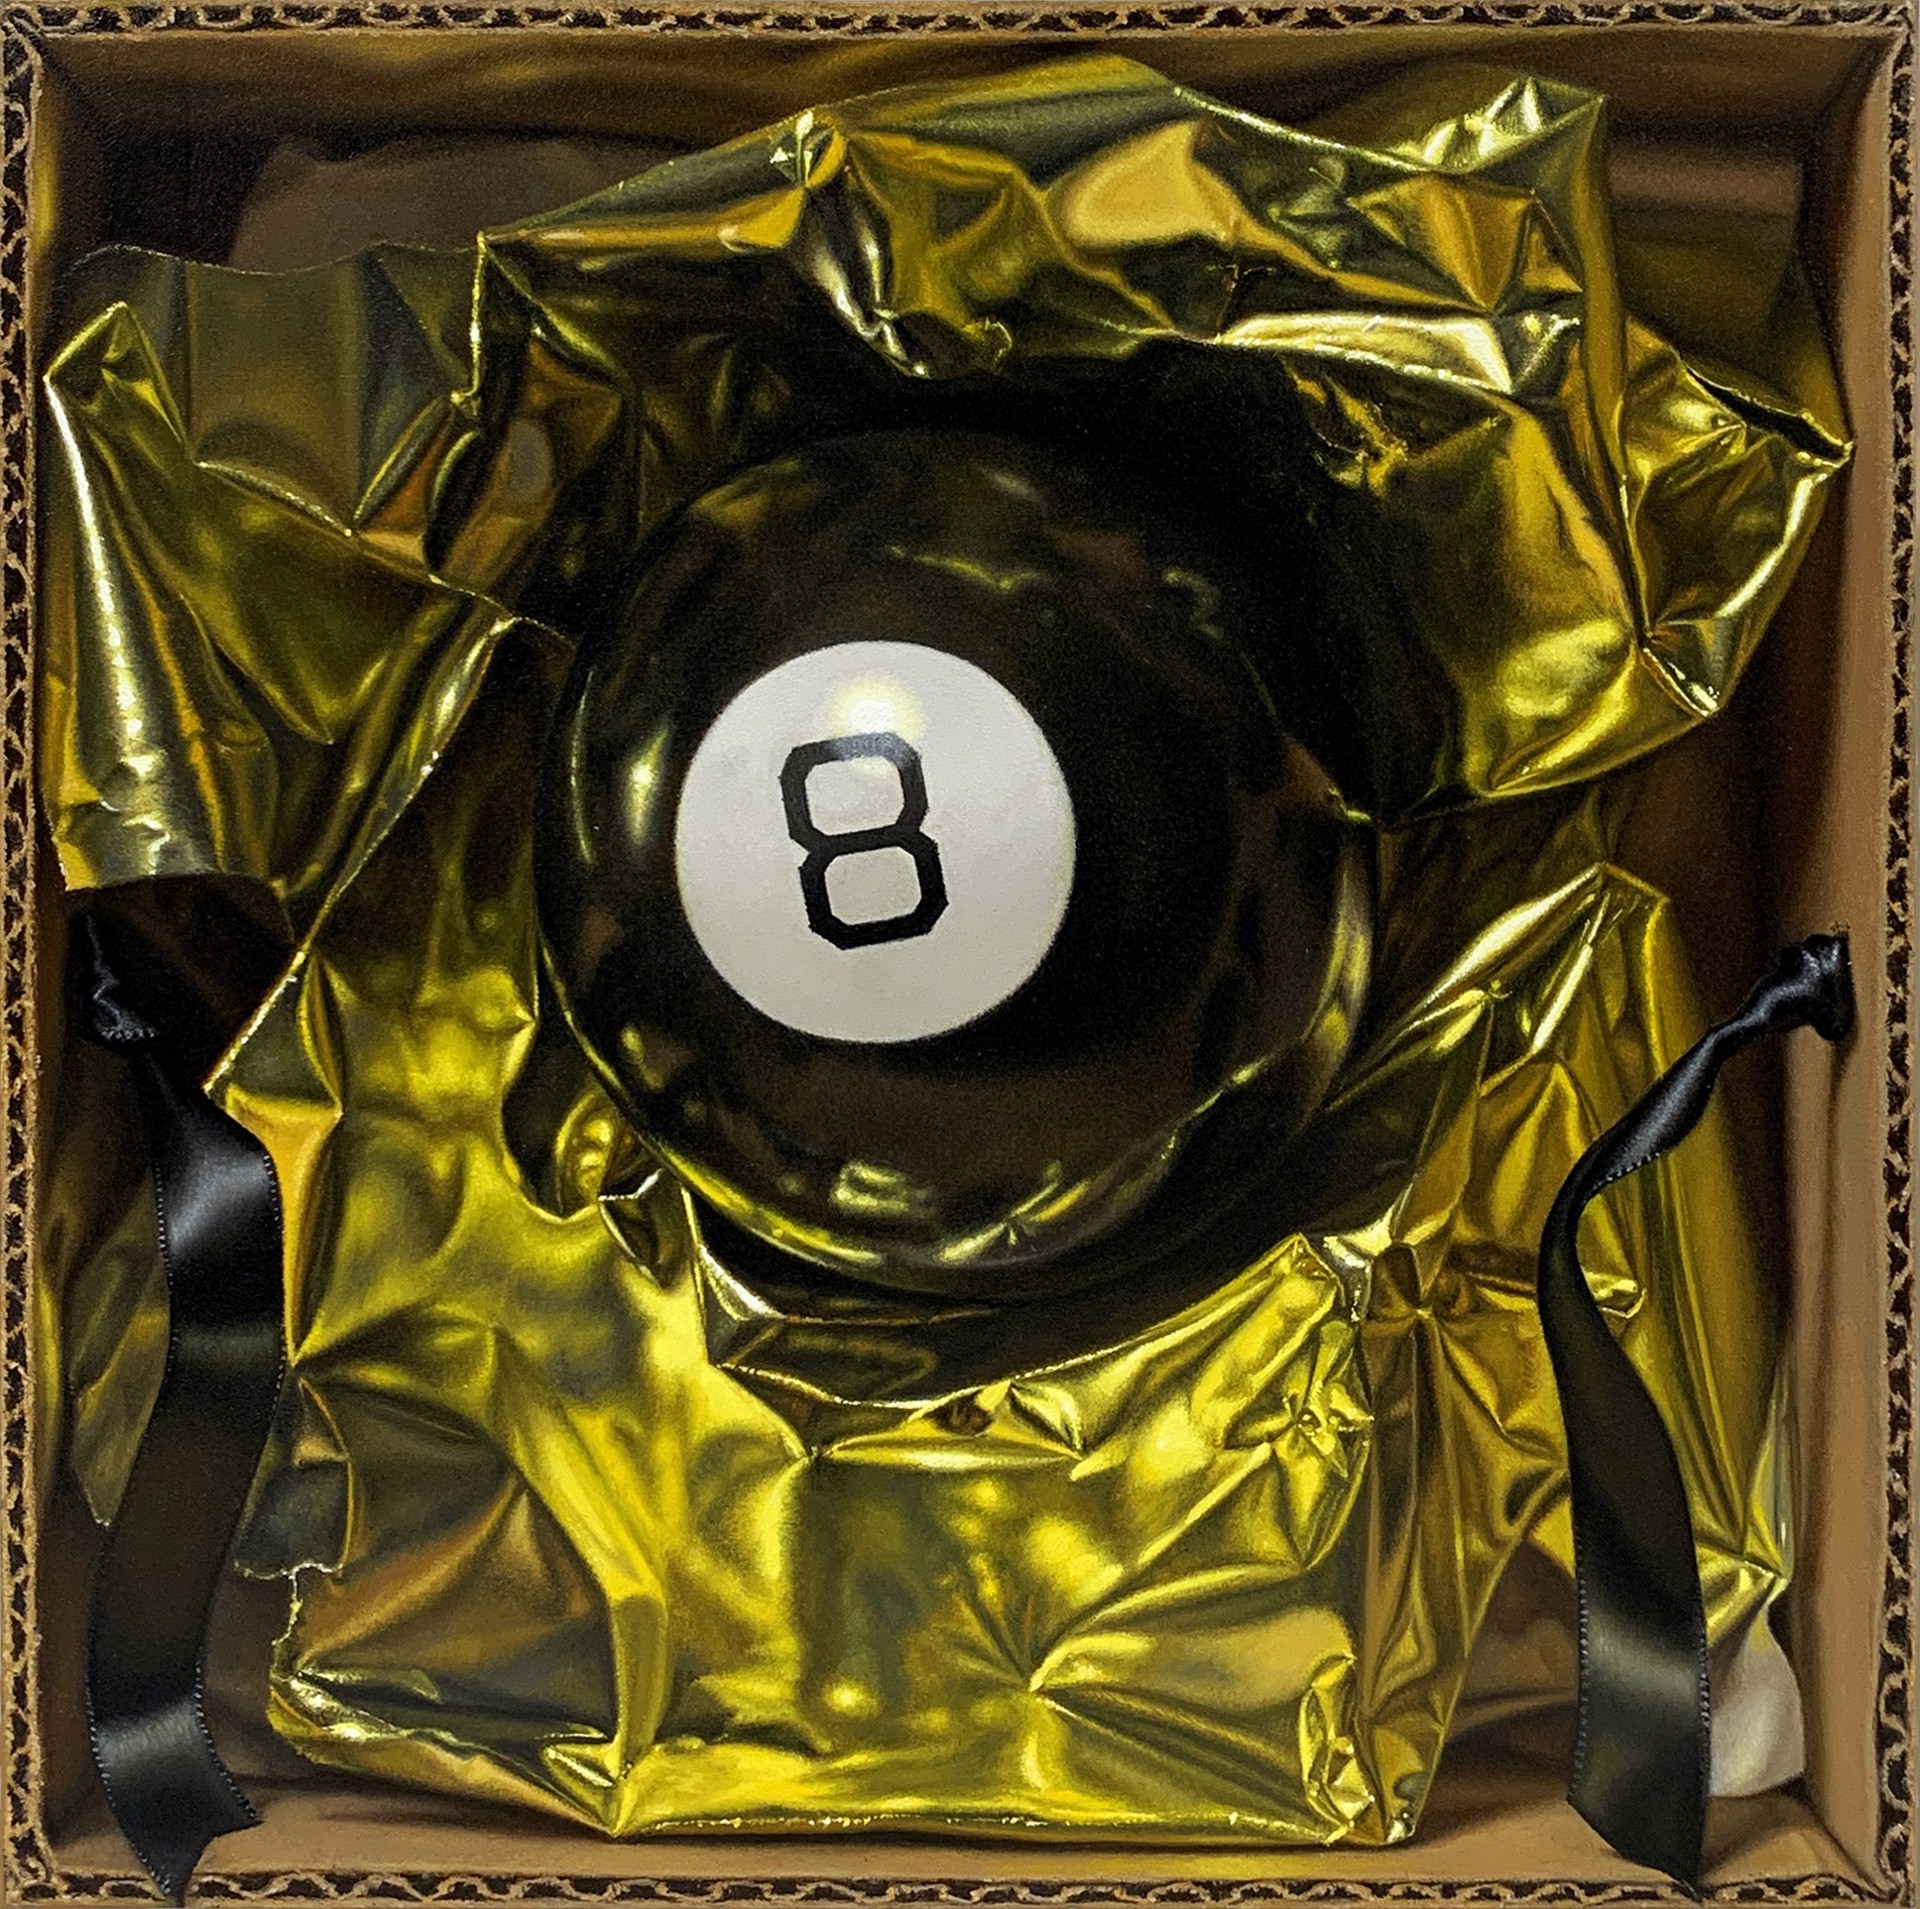 Magic 8-Ball by Natalie Featherston